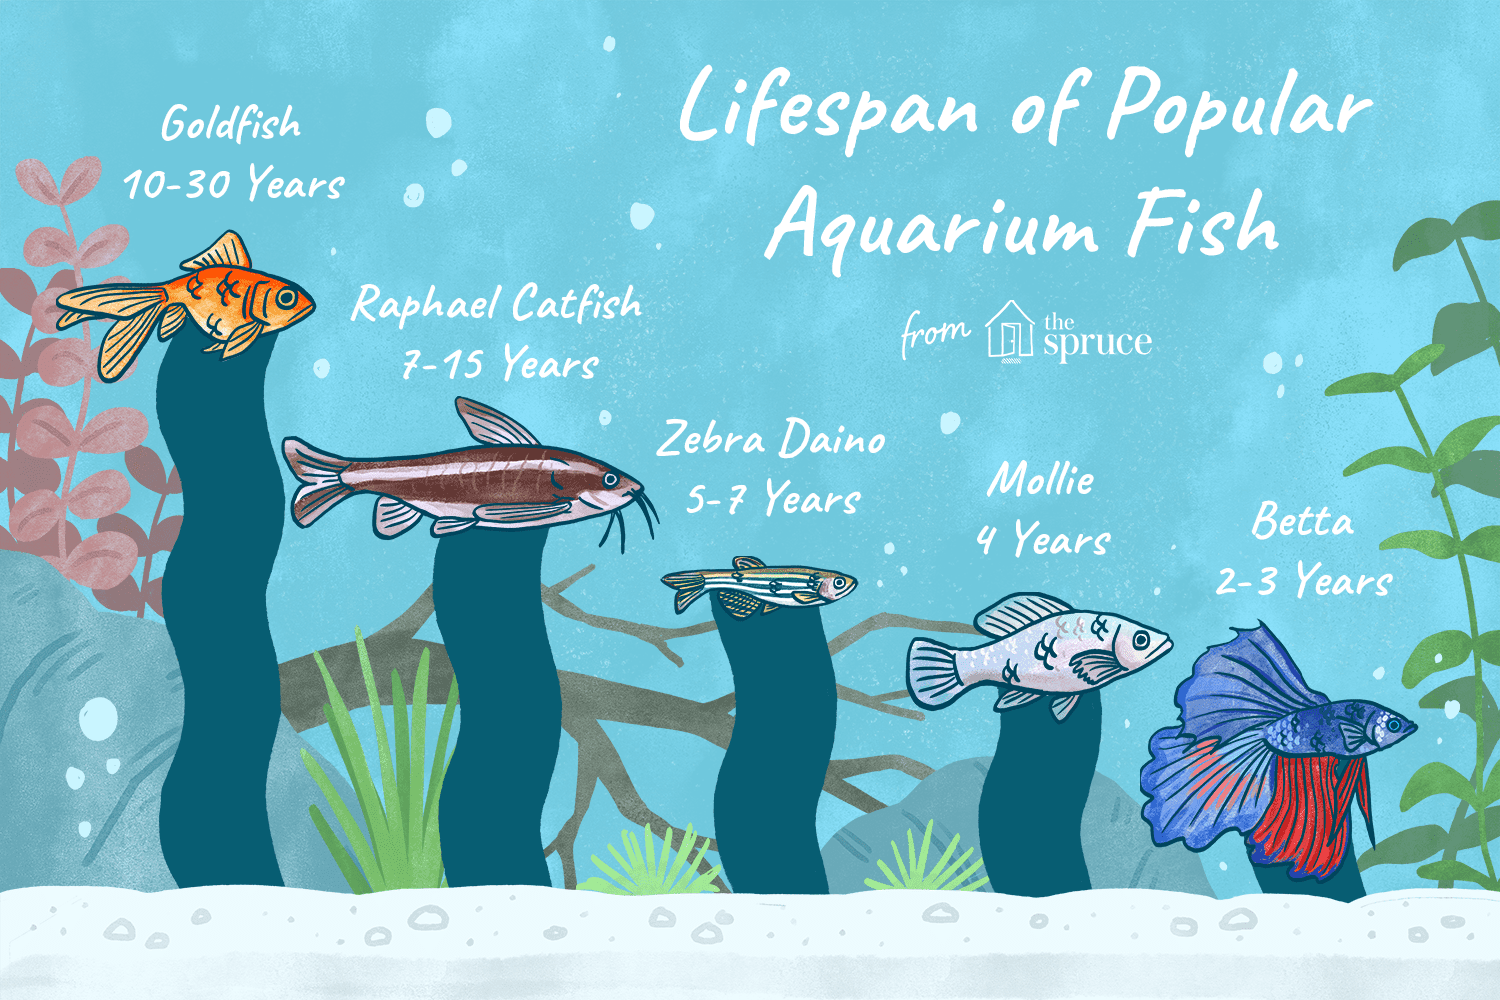 What is the average lifespan of a fish?